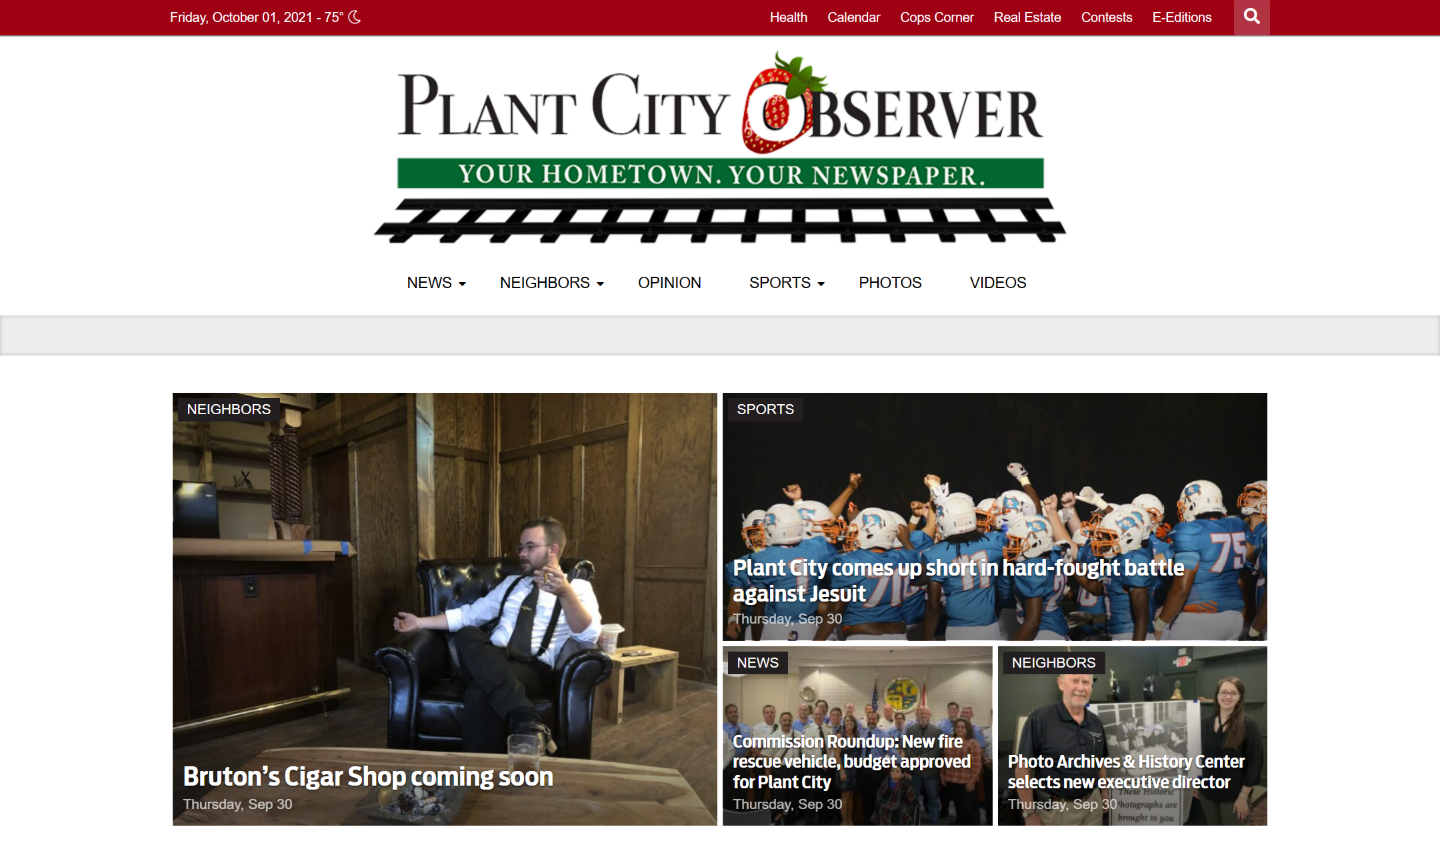 Tampa Newspapers 06 The Plant City Observer website